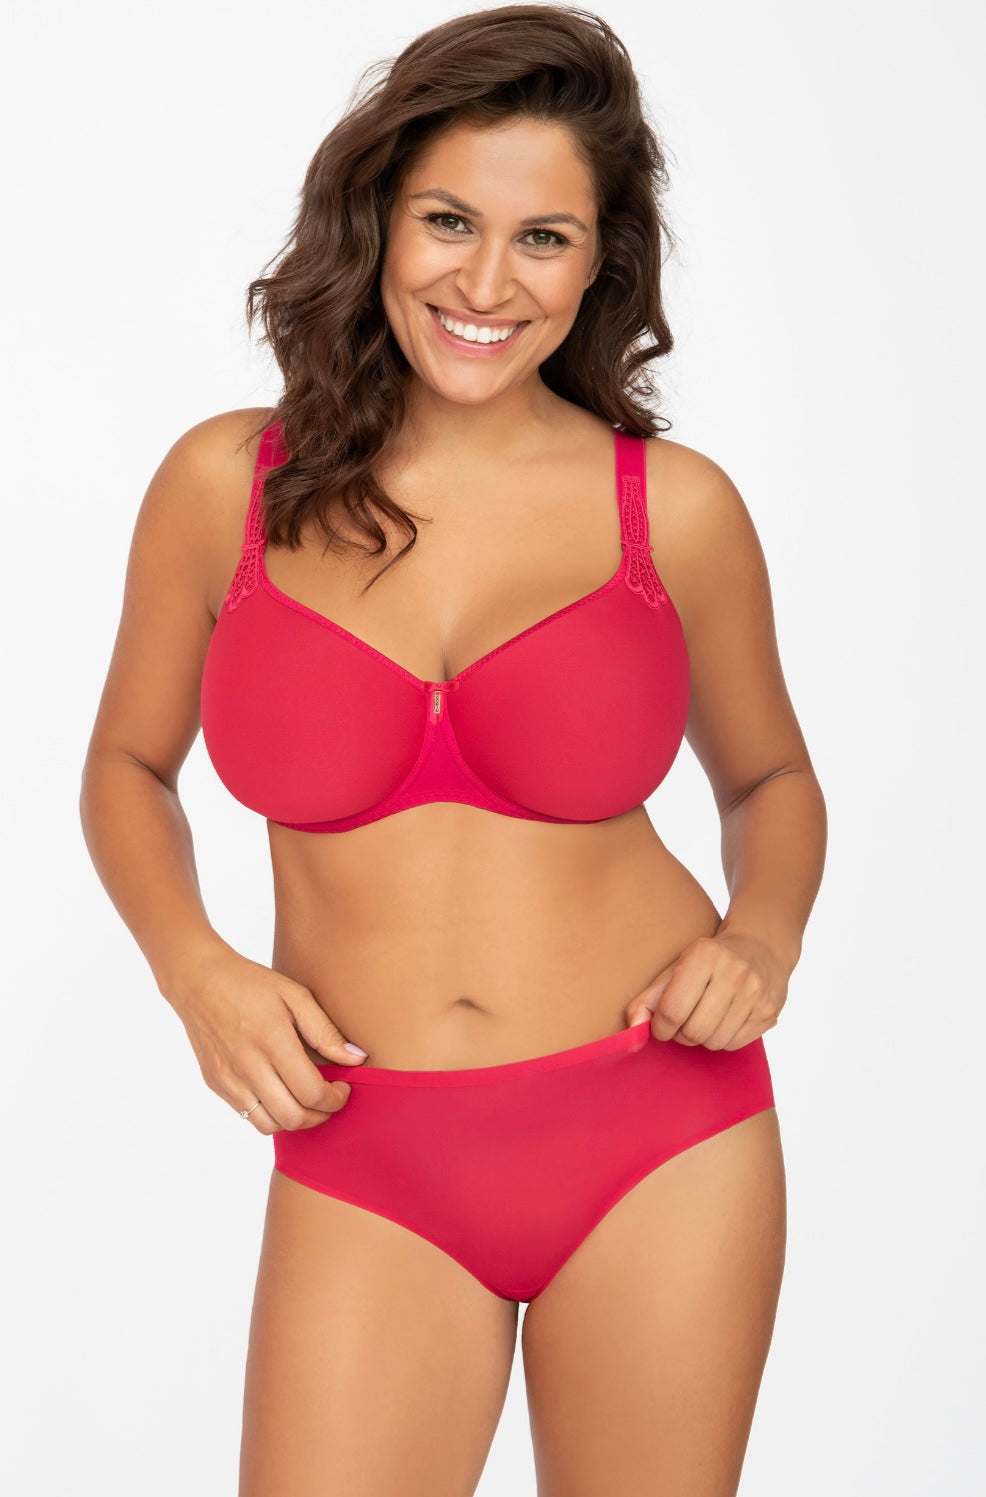 Virginia 3D Spacer Bra - Ruby worn by model front view